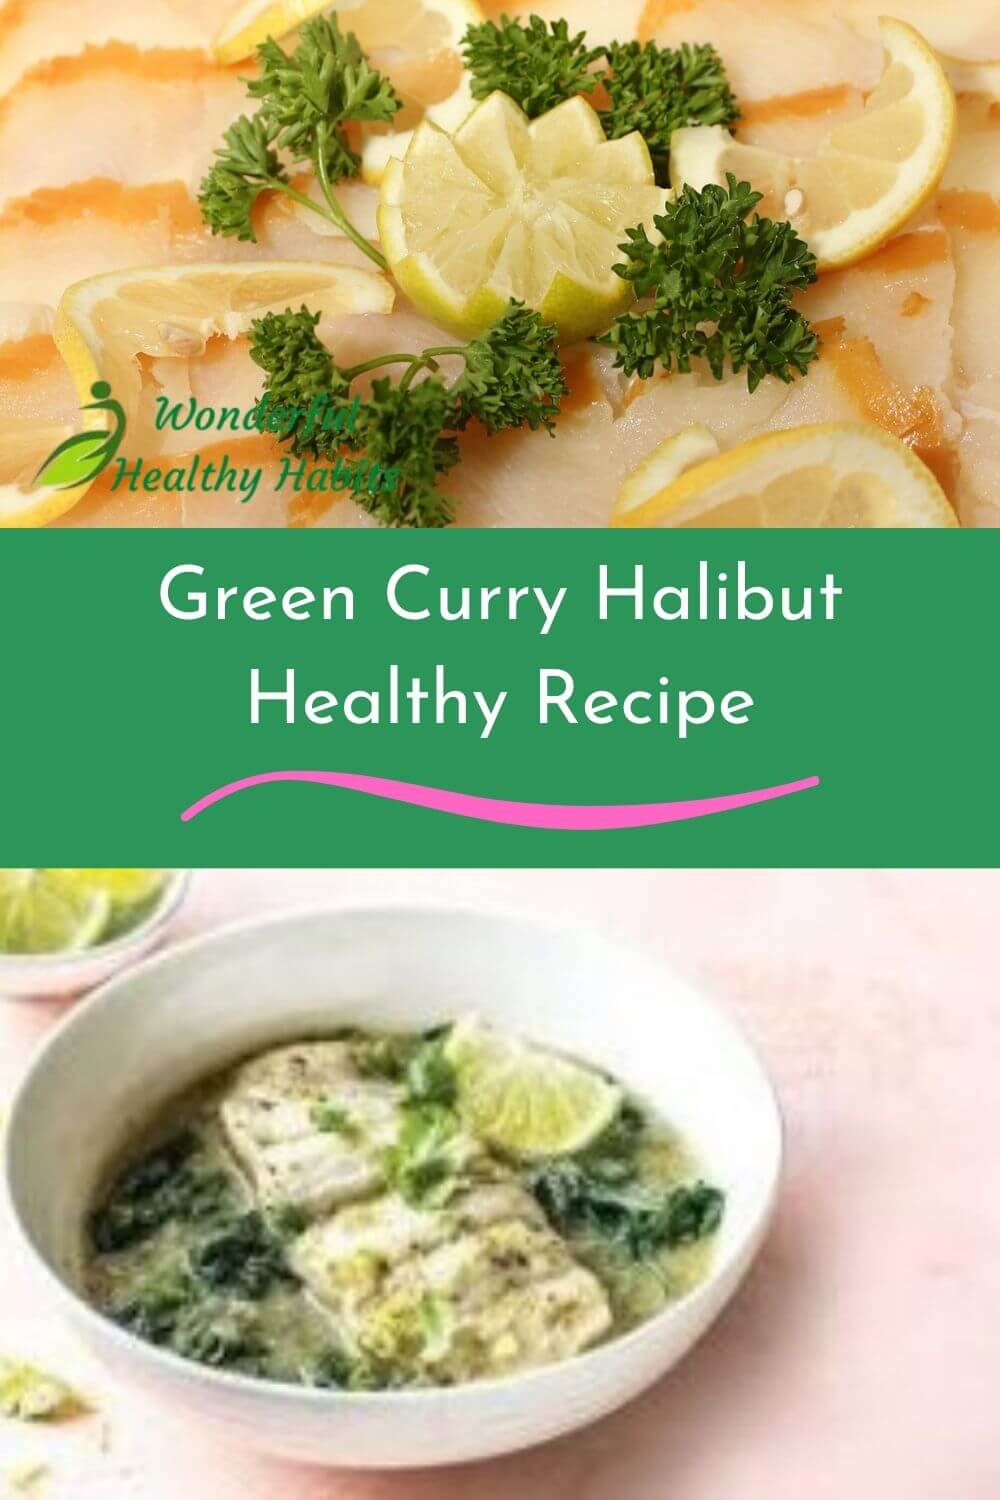 Green Curry Halibut Healthy Recipe